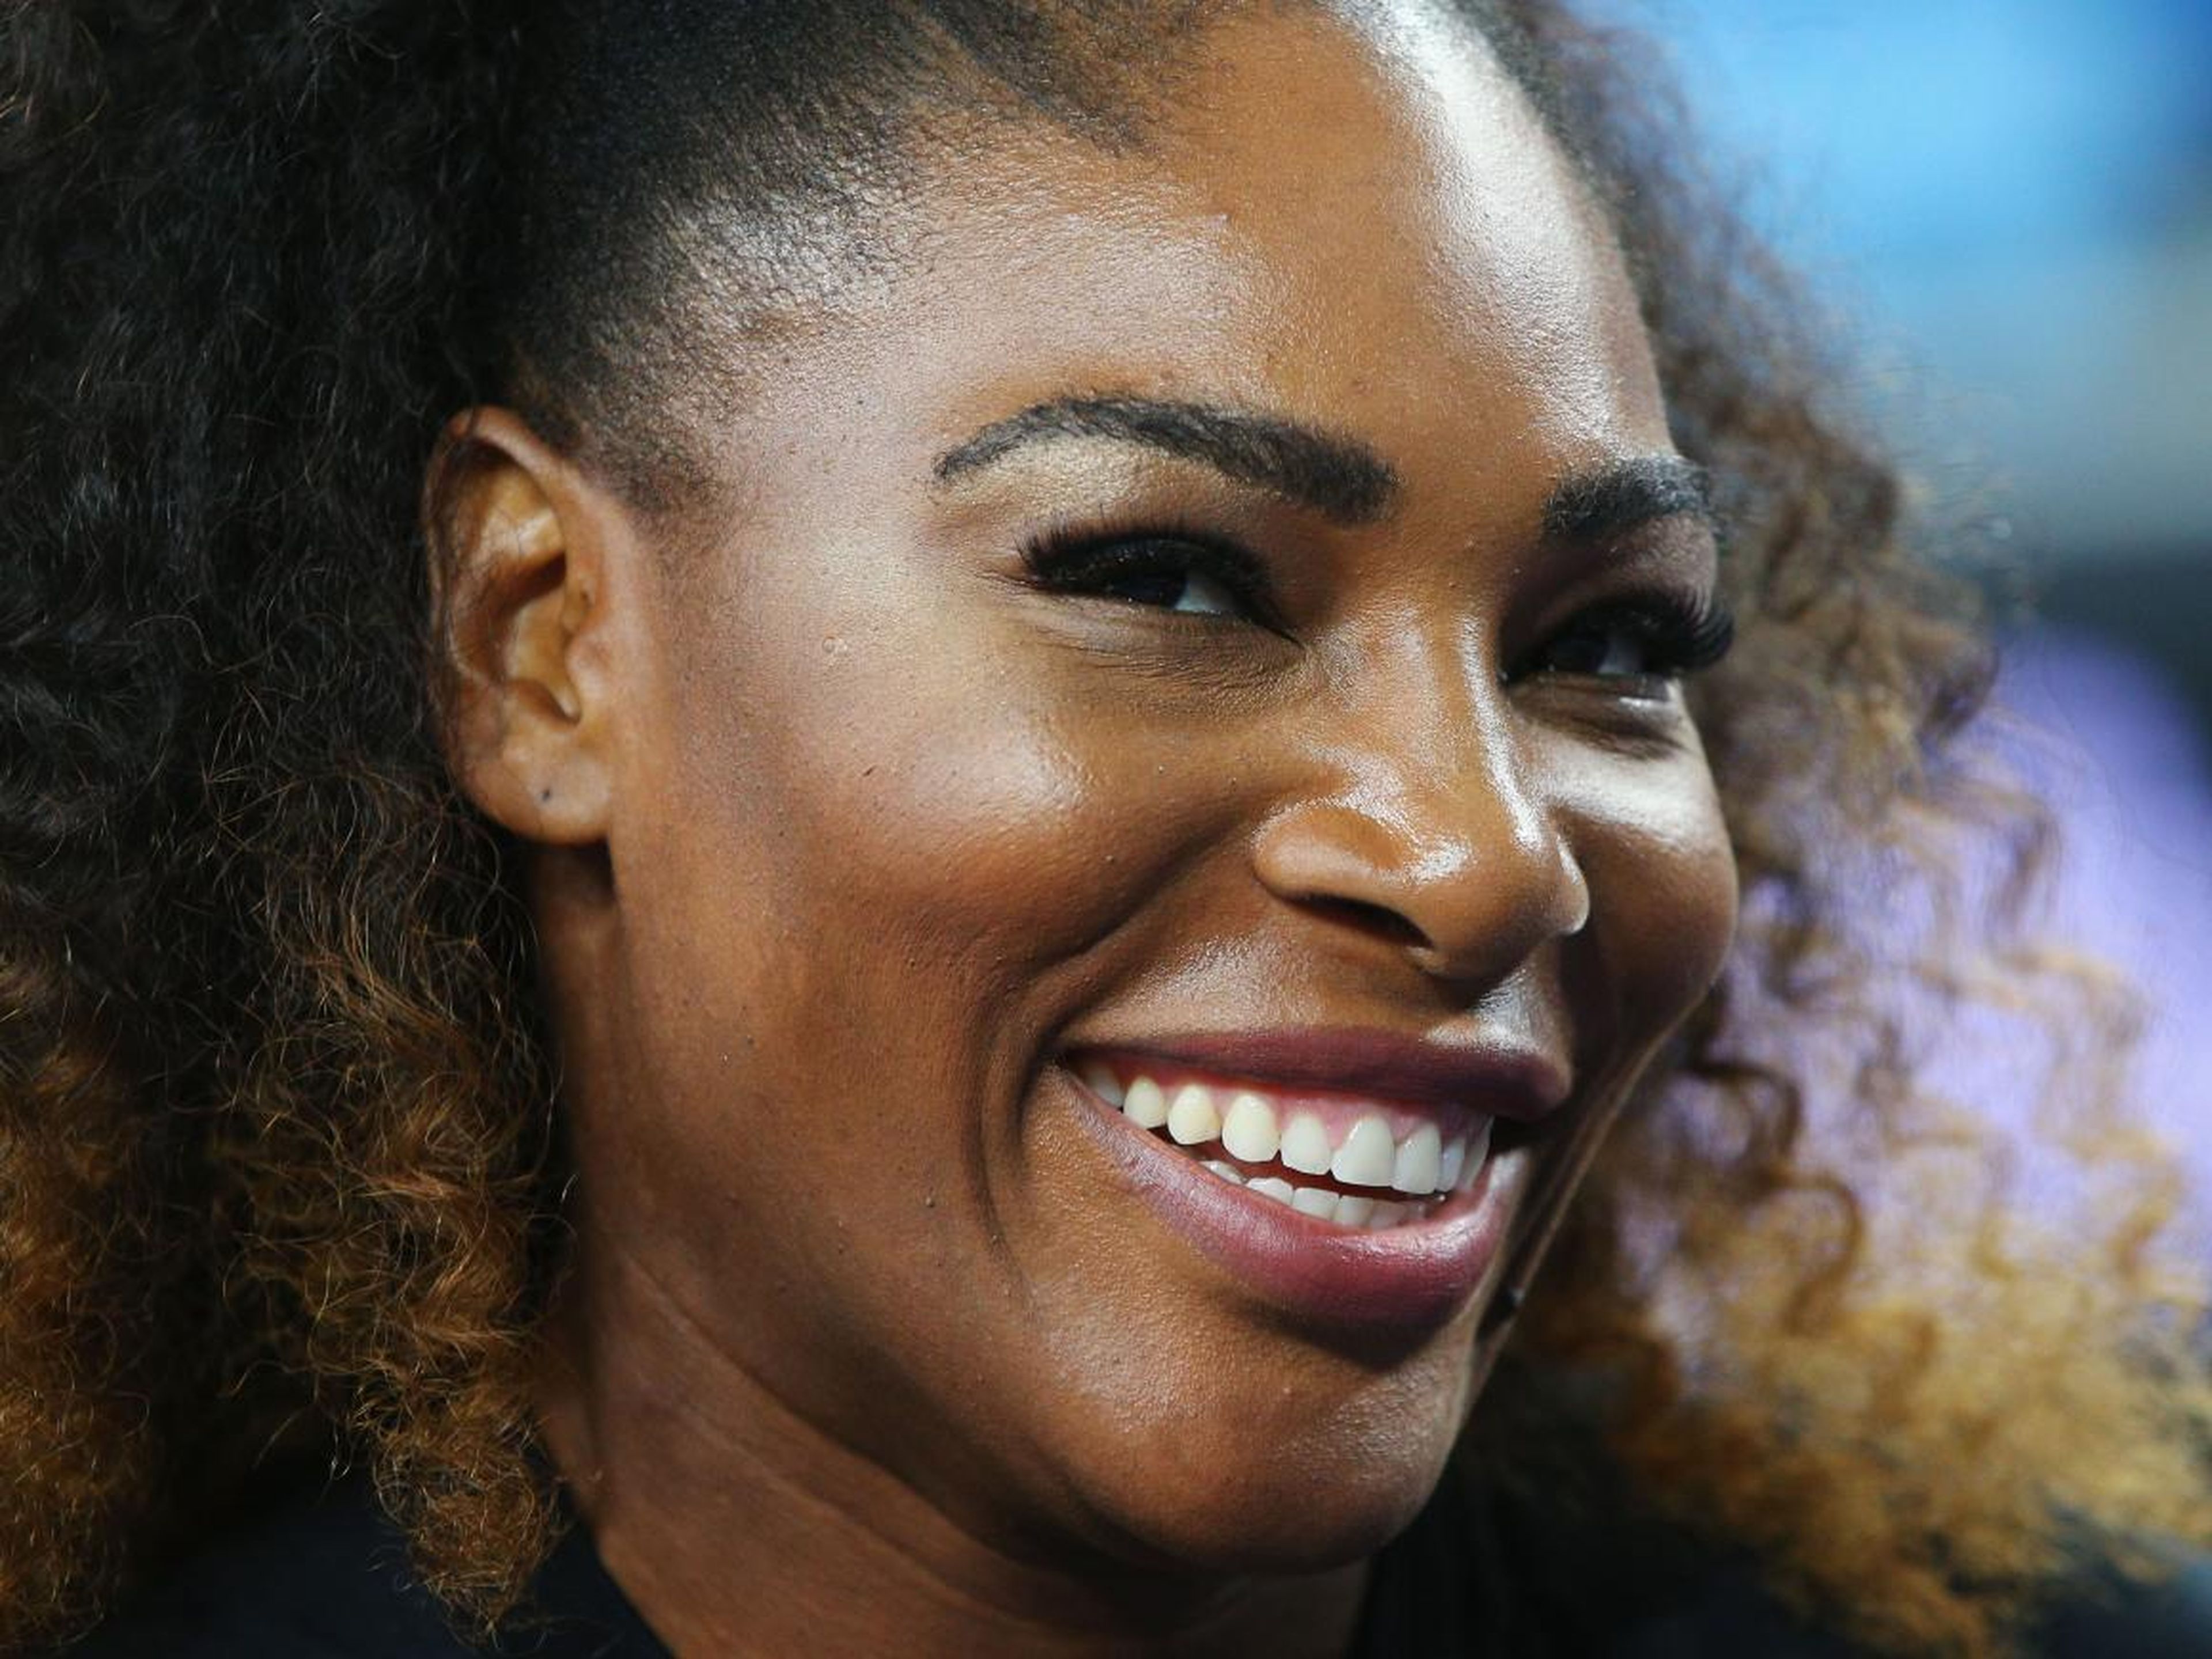 Meanwhile, over in Beverly Hills is Serena Williams' home that she bought in 2017 for $6.7 million, or $6.9 million in today's dollars, only 3.8% of her reported $180 million net worth.